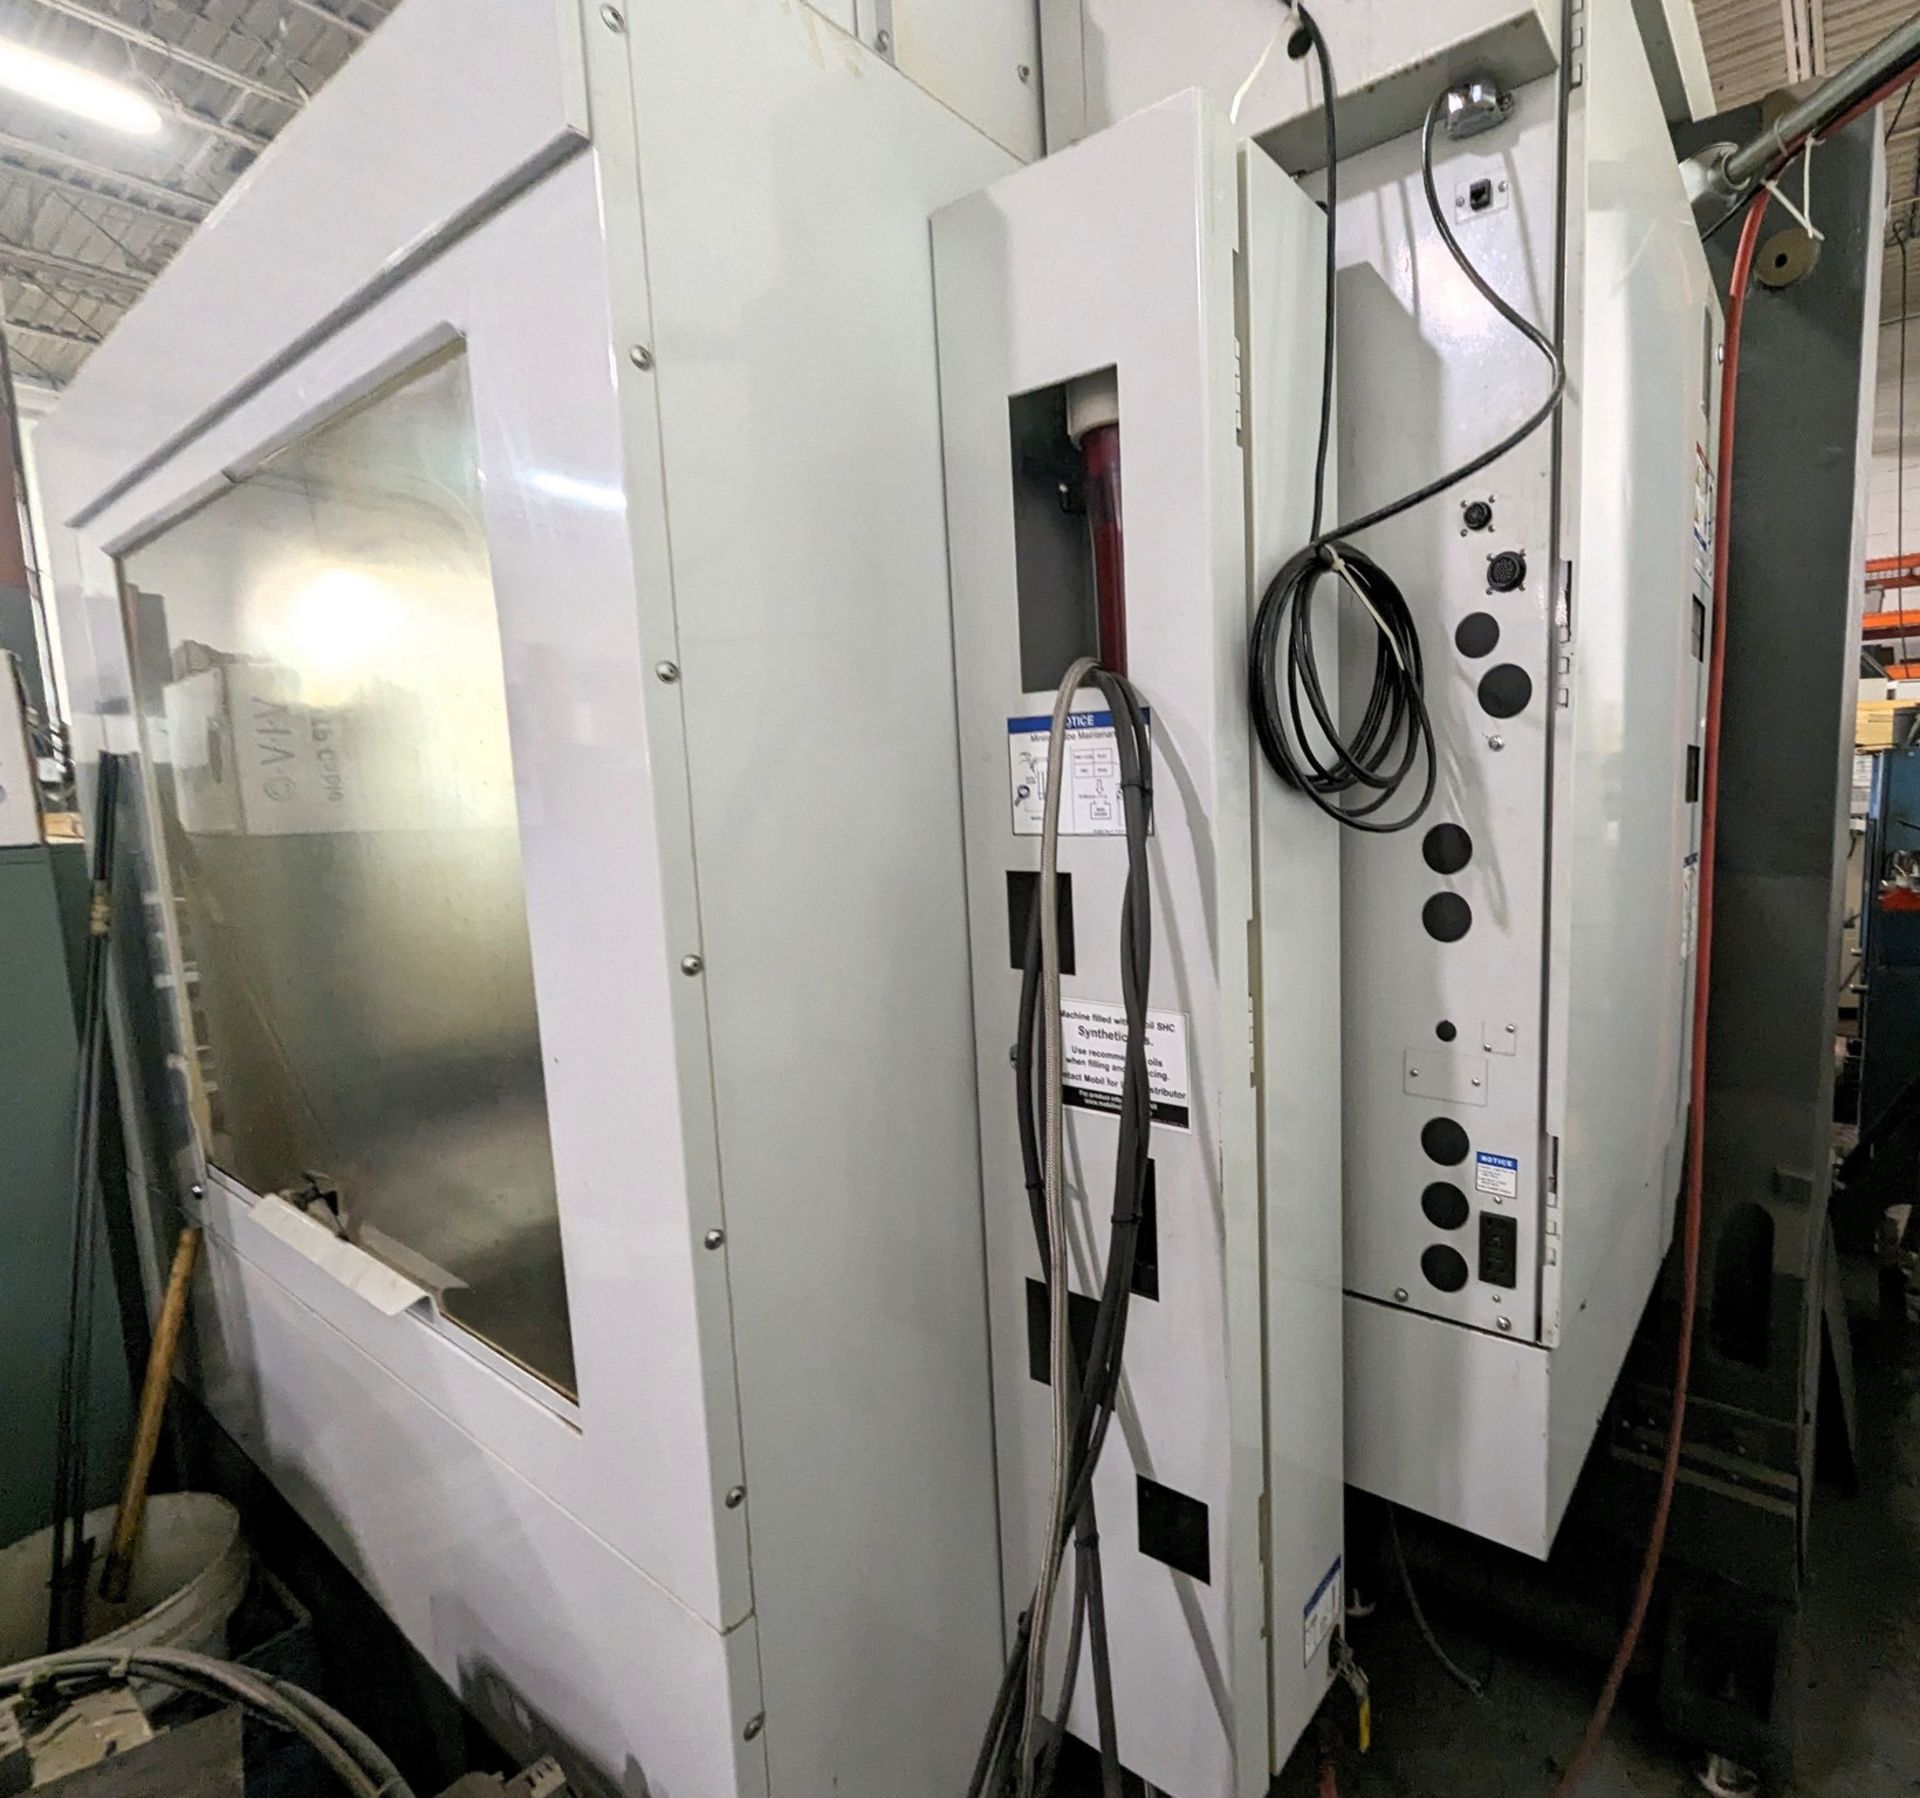 2012 HAAS VF6/40 CNC VERTICAL MACHINING CENTER, CNC CONTROL, 24” X 60” TABLE, 40 TAPER, 10,000 RPM - Image 14 of 19